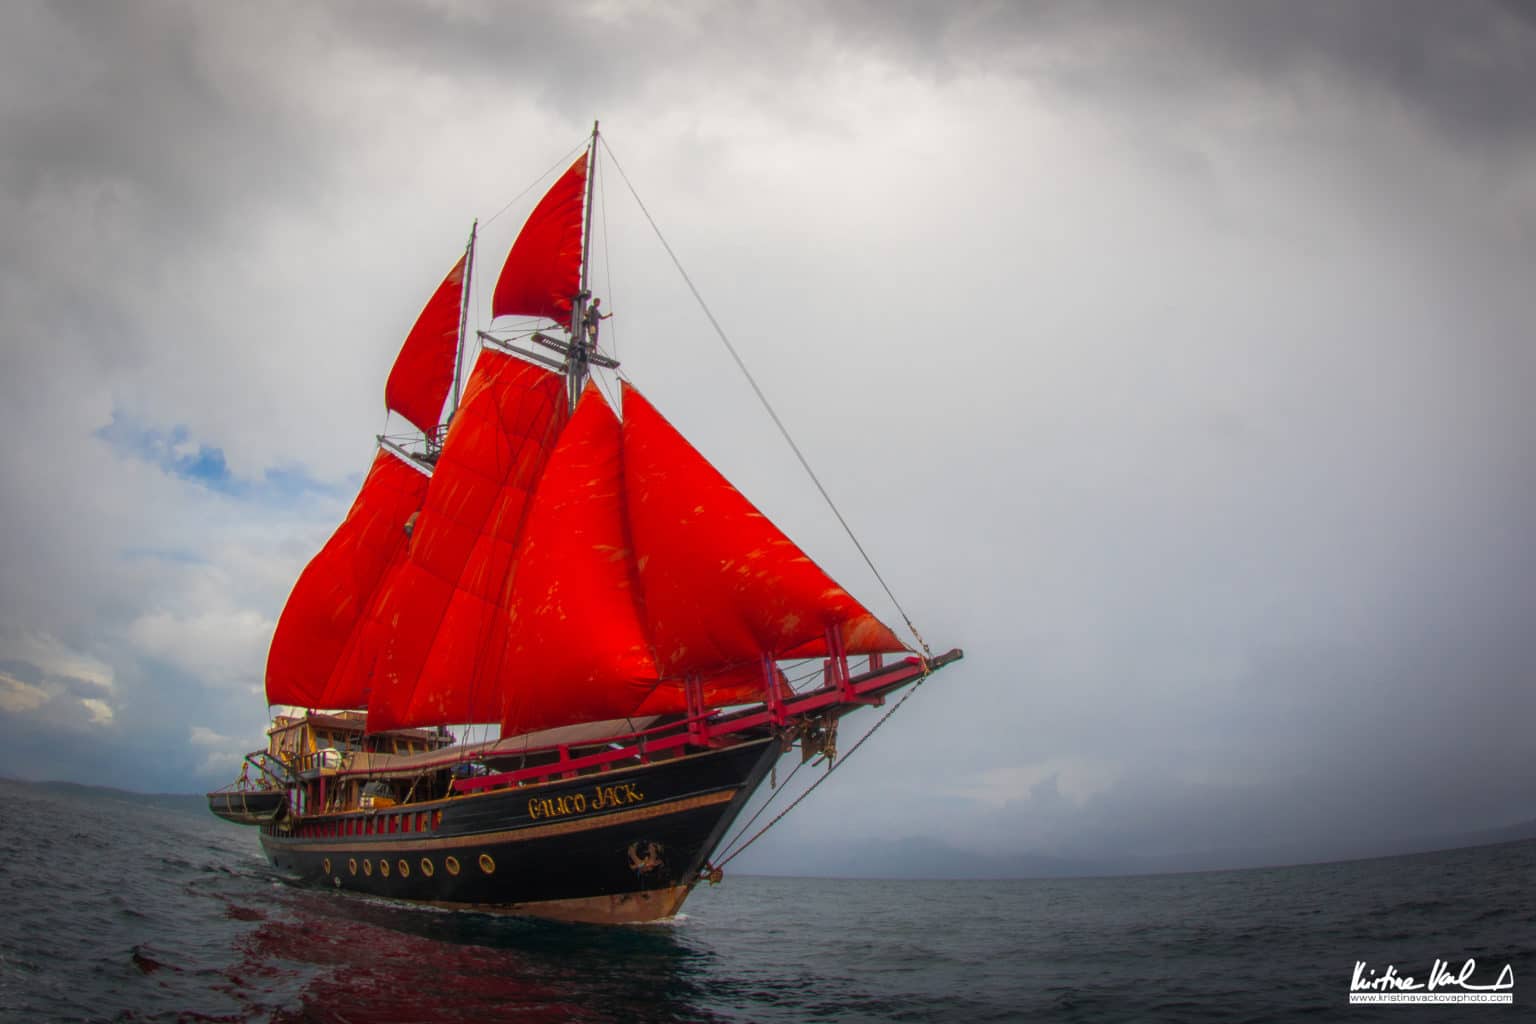 Indonesia Luxury Adventure and Travel Package | Liveaboard Diving Cruise | Calico Jack